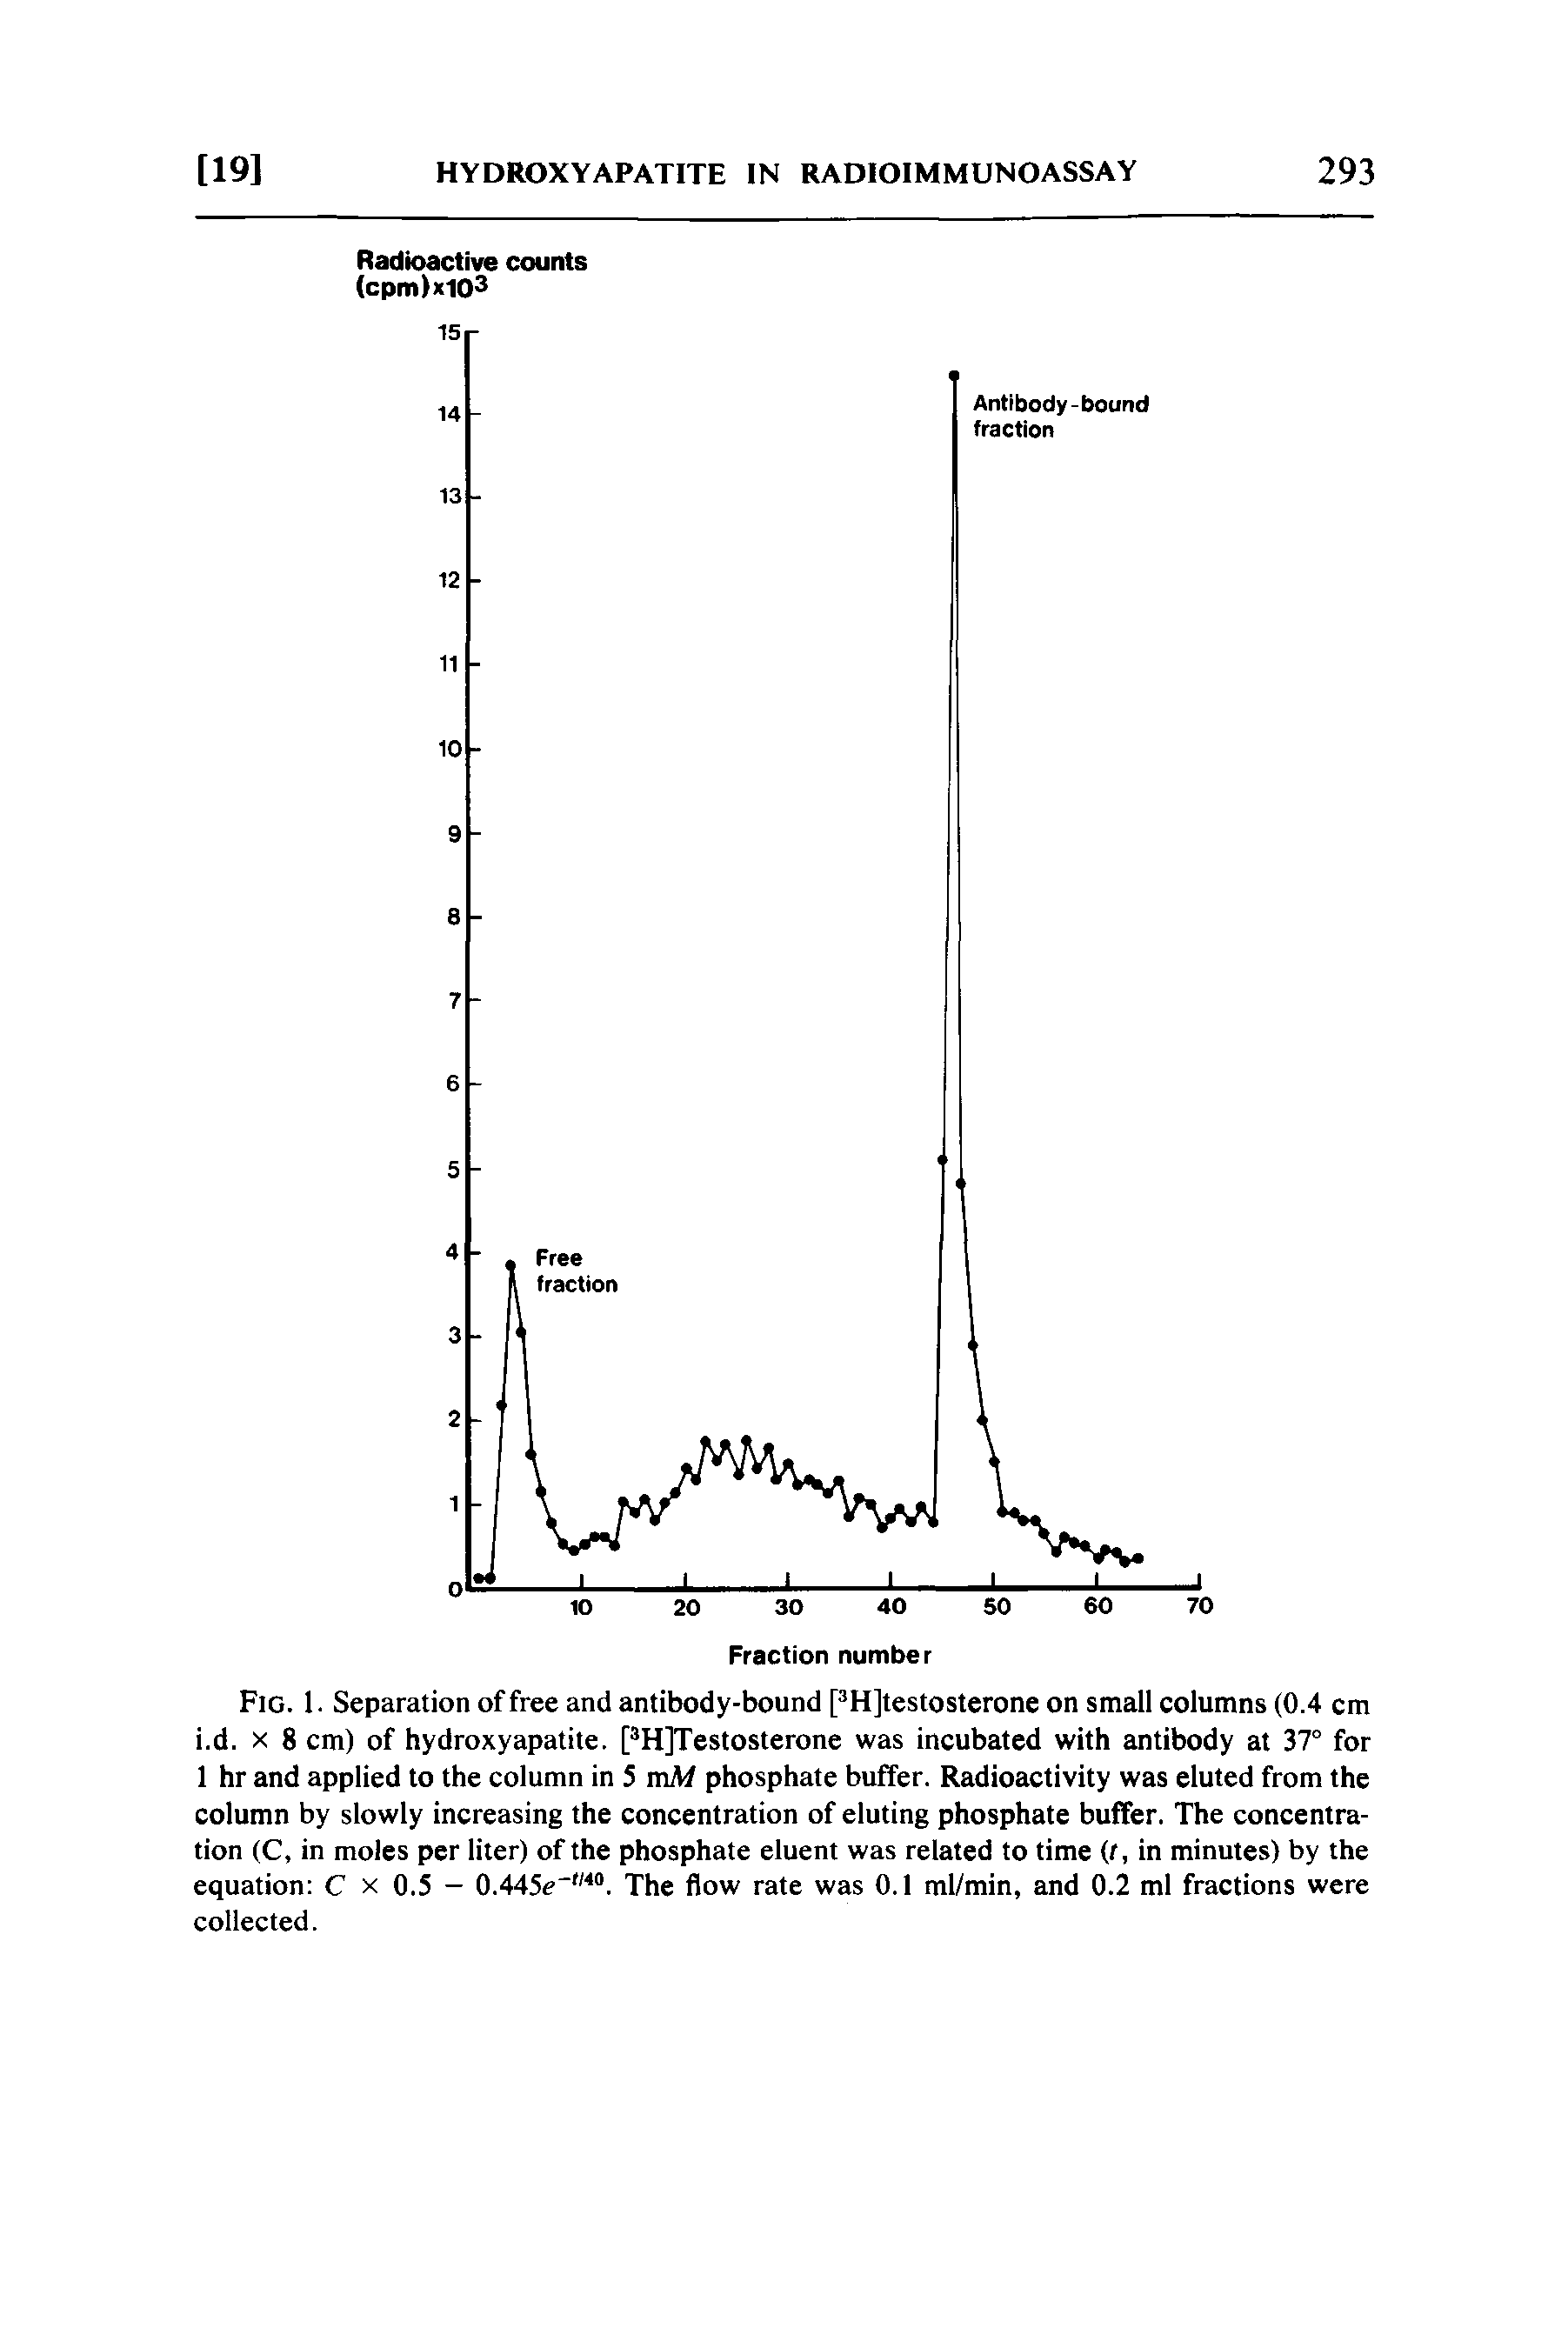 Fig. 1. Separation of free and antibody-bound PH]testosterone on small columns (0.4 cm i.d. X 8 cm) of hydroxyapatite. [ H]Testosterone was incubated with antibody at 37° for 1 hr and applied to the column in 5 mM phosphate buffer. Radioactivity was eluted from the column by slowly increasing the concentration of eluting phosphate buffer. The concentration (C, in moles per liter) of the phosphate eluent was related to time (r, in minutes) by the equation C x 0.5 - 0.445e " . The flow rate was 0.1 ml/min, and 0.2 ml fractions were collected.